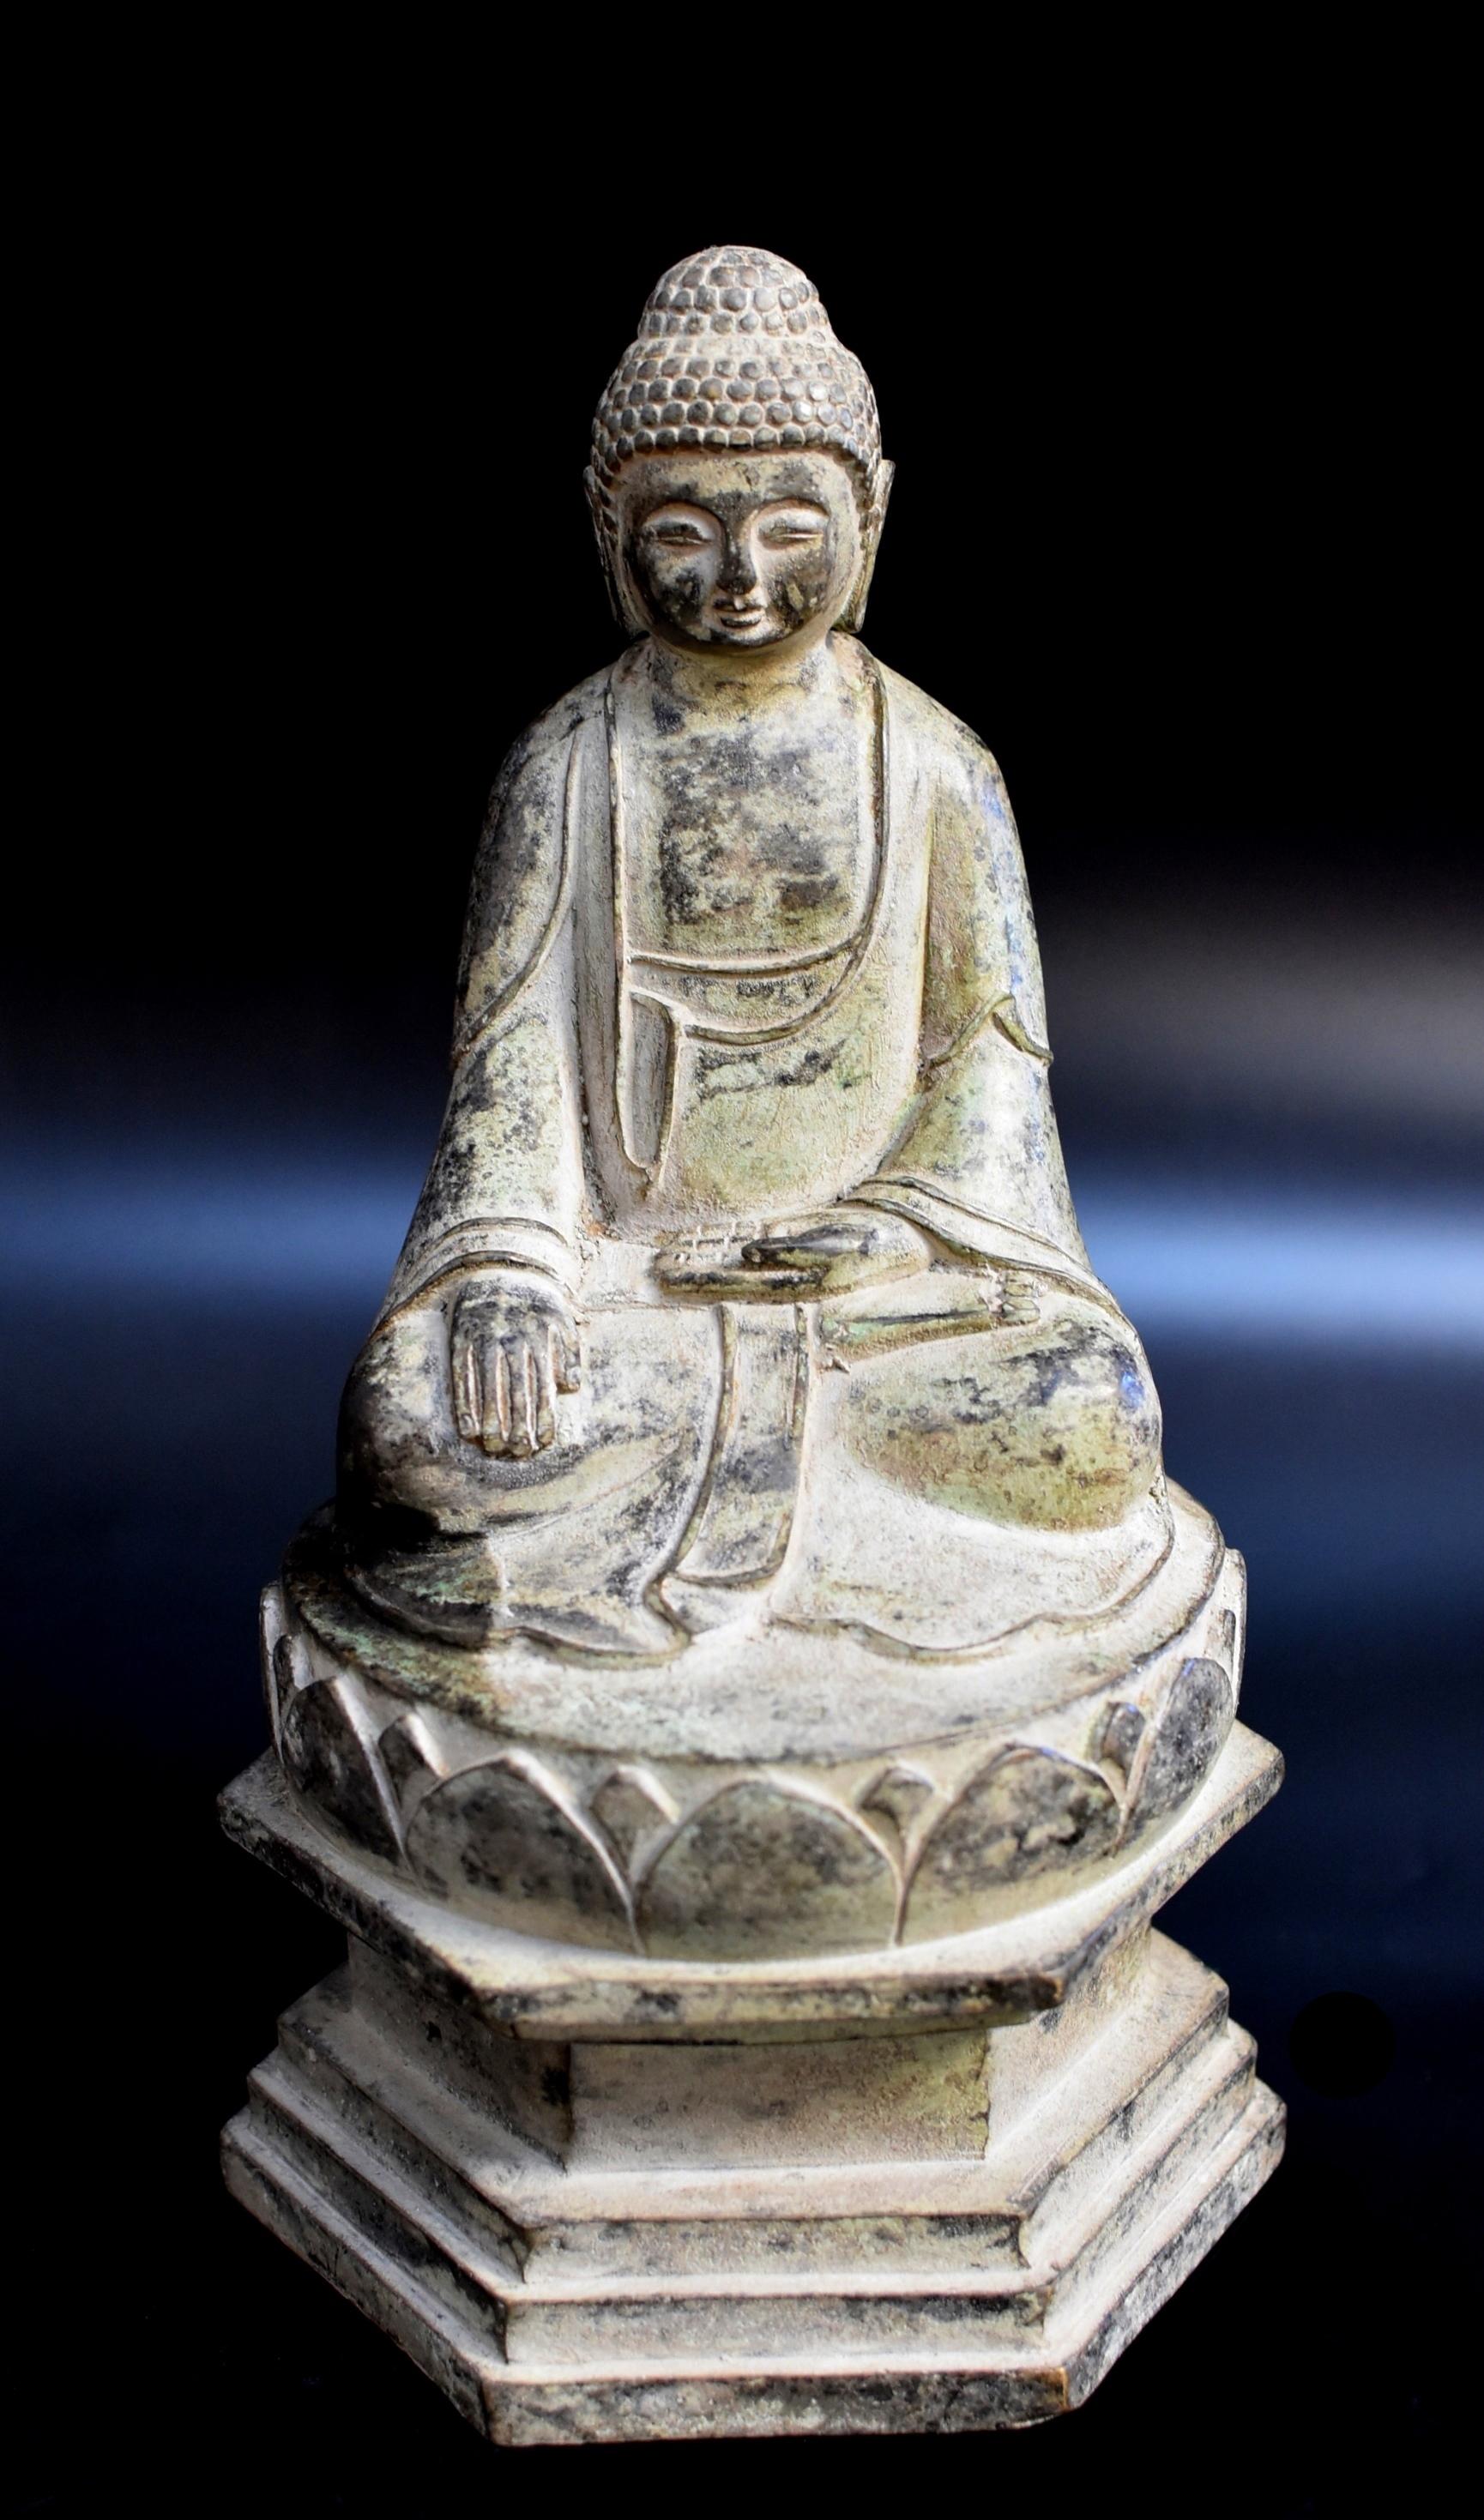 A beautiful bronze statue of Young Buddha. Seated in dhyanasana on lotus throne elevated on a high pagoda base, the right hand in bhumisparsha mudra and the left in dhyana mudra, wearing a flowing robe draping over the shoulders and pooling